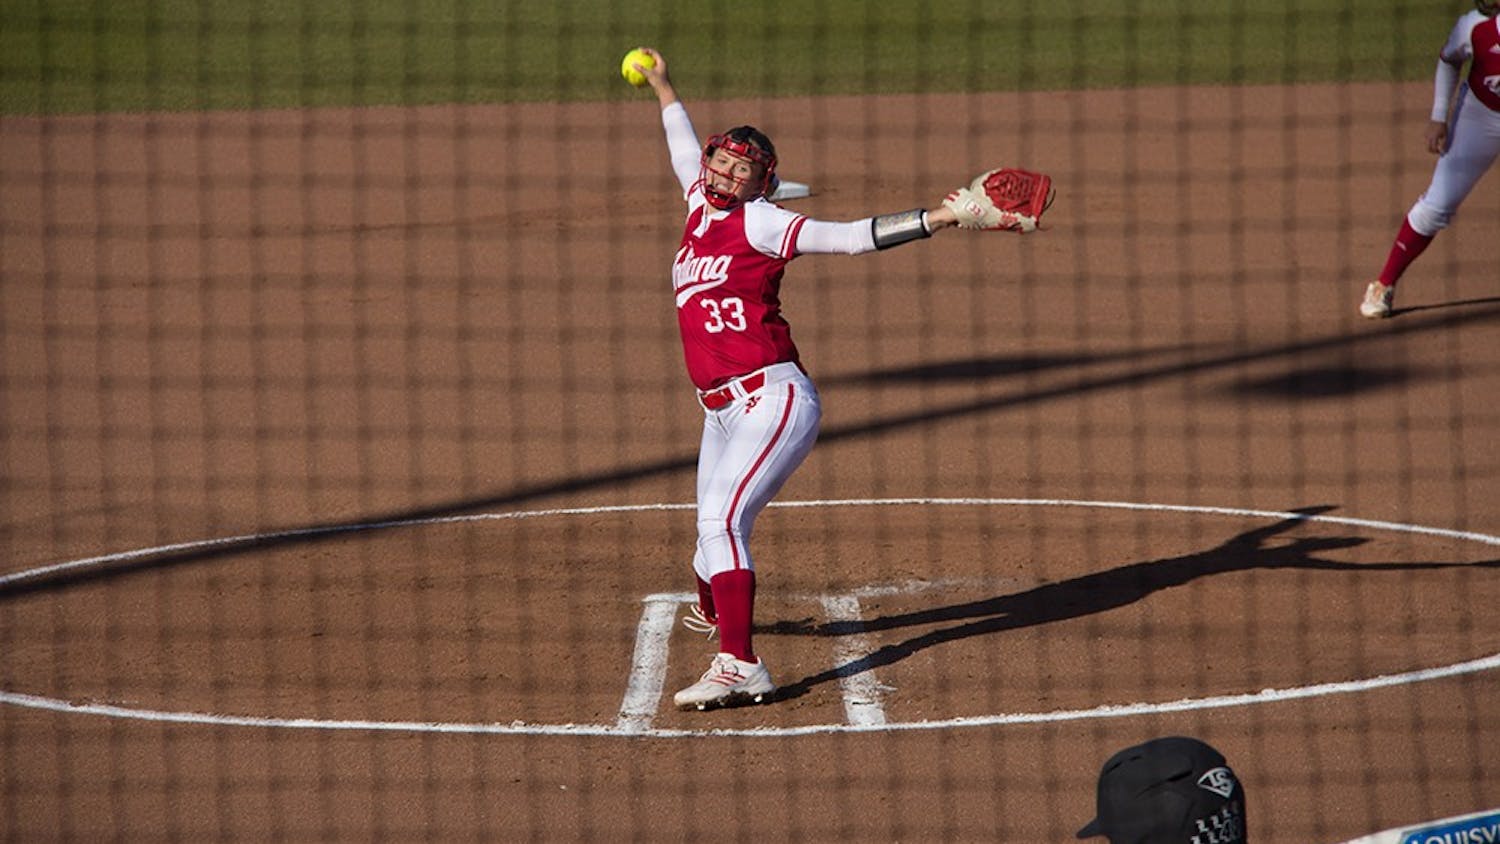 Freshman pitcher Tara Trainer throws a pitch during Tuesday againsts University of Louisville at Andy Mohr Field. IU lost agianst University of Louisville 2-12.